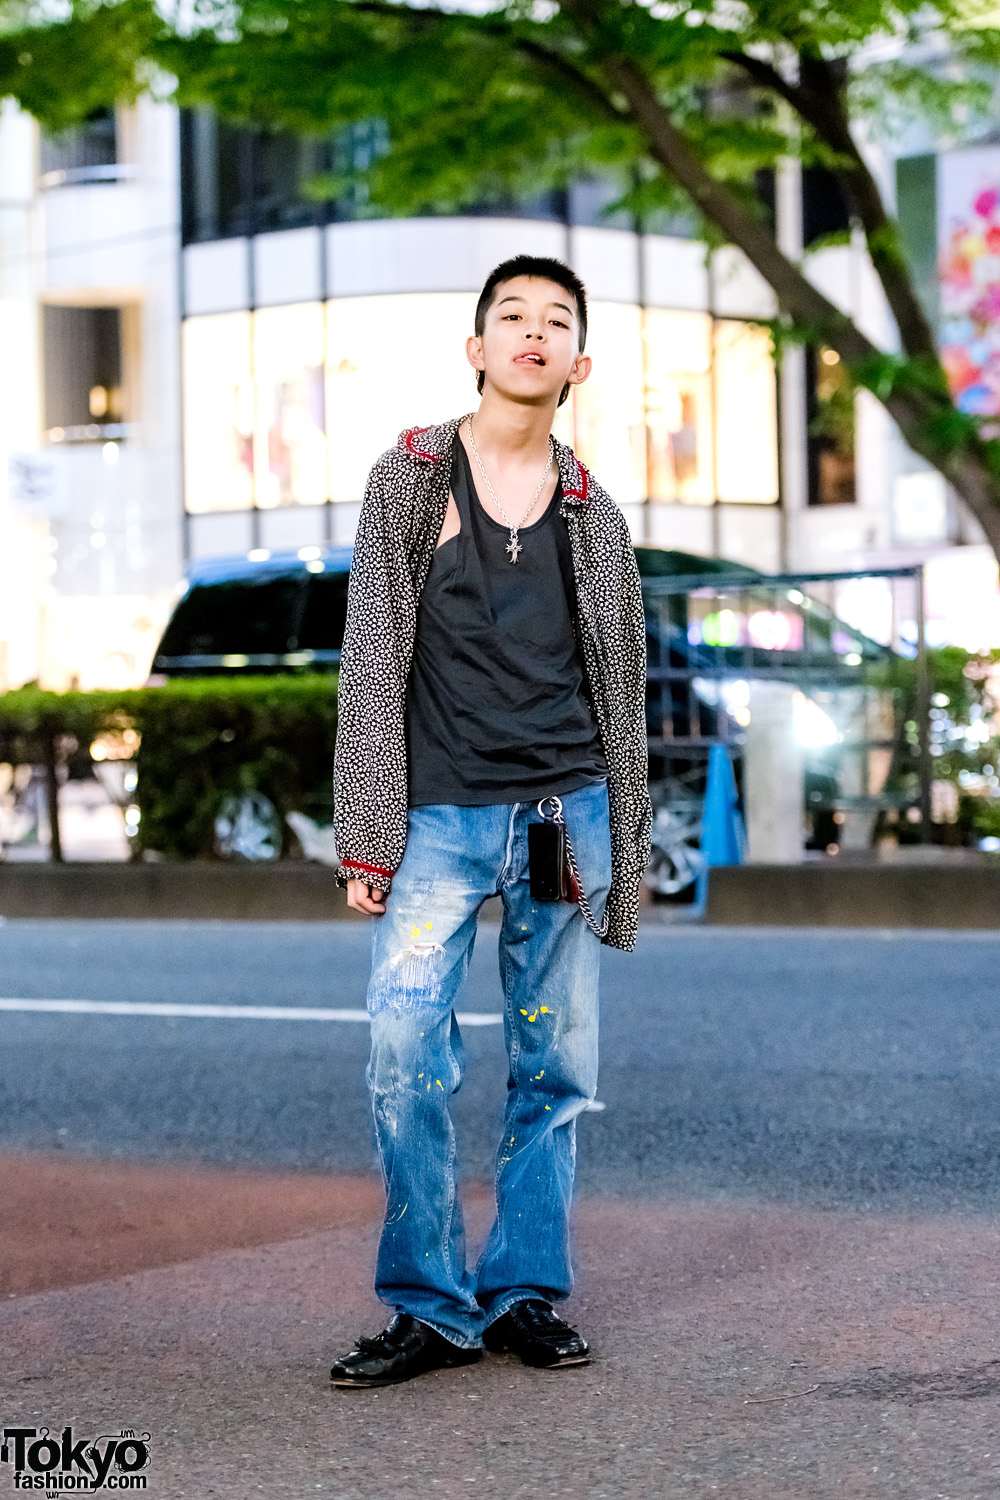 Teen's Street Style Gianni Versace Tops, Levi's Distressed Jeans & Vintage Tassel Loafers – Tokyo Fashion